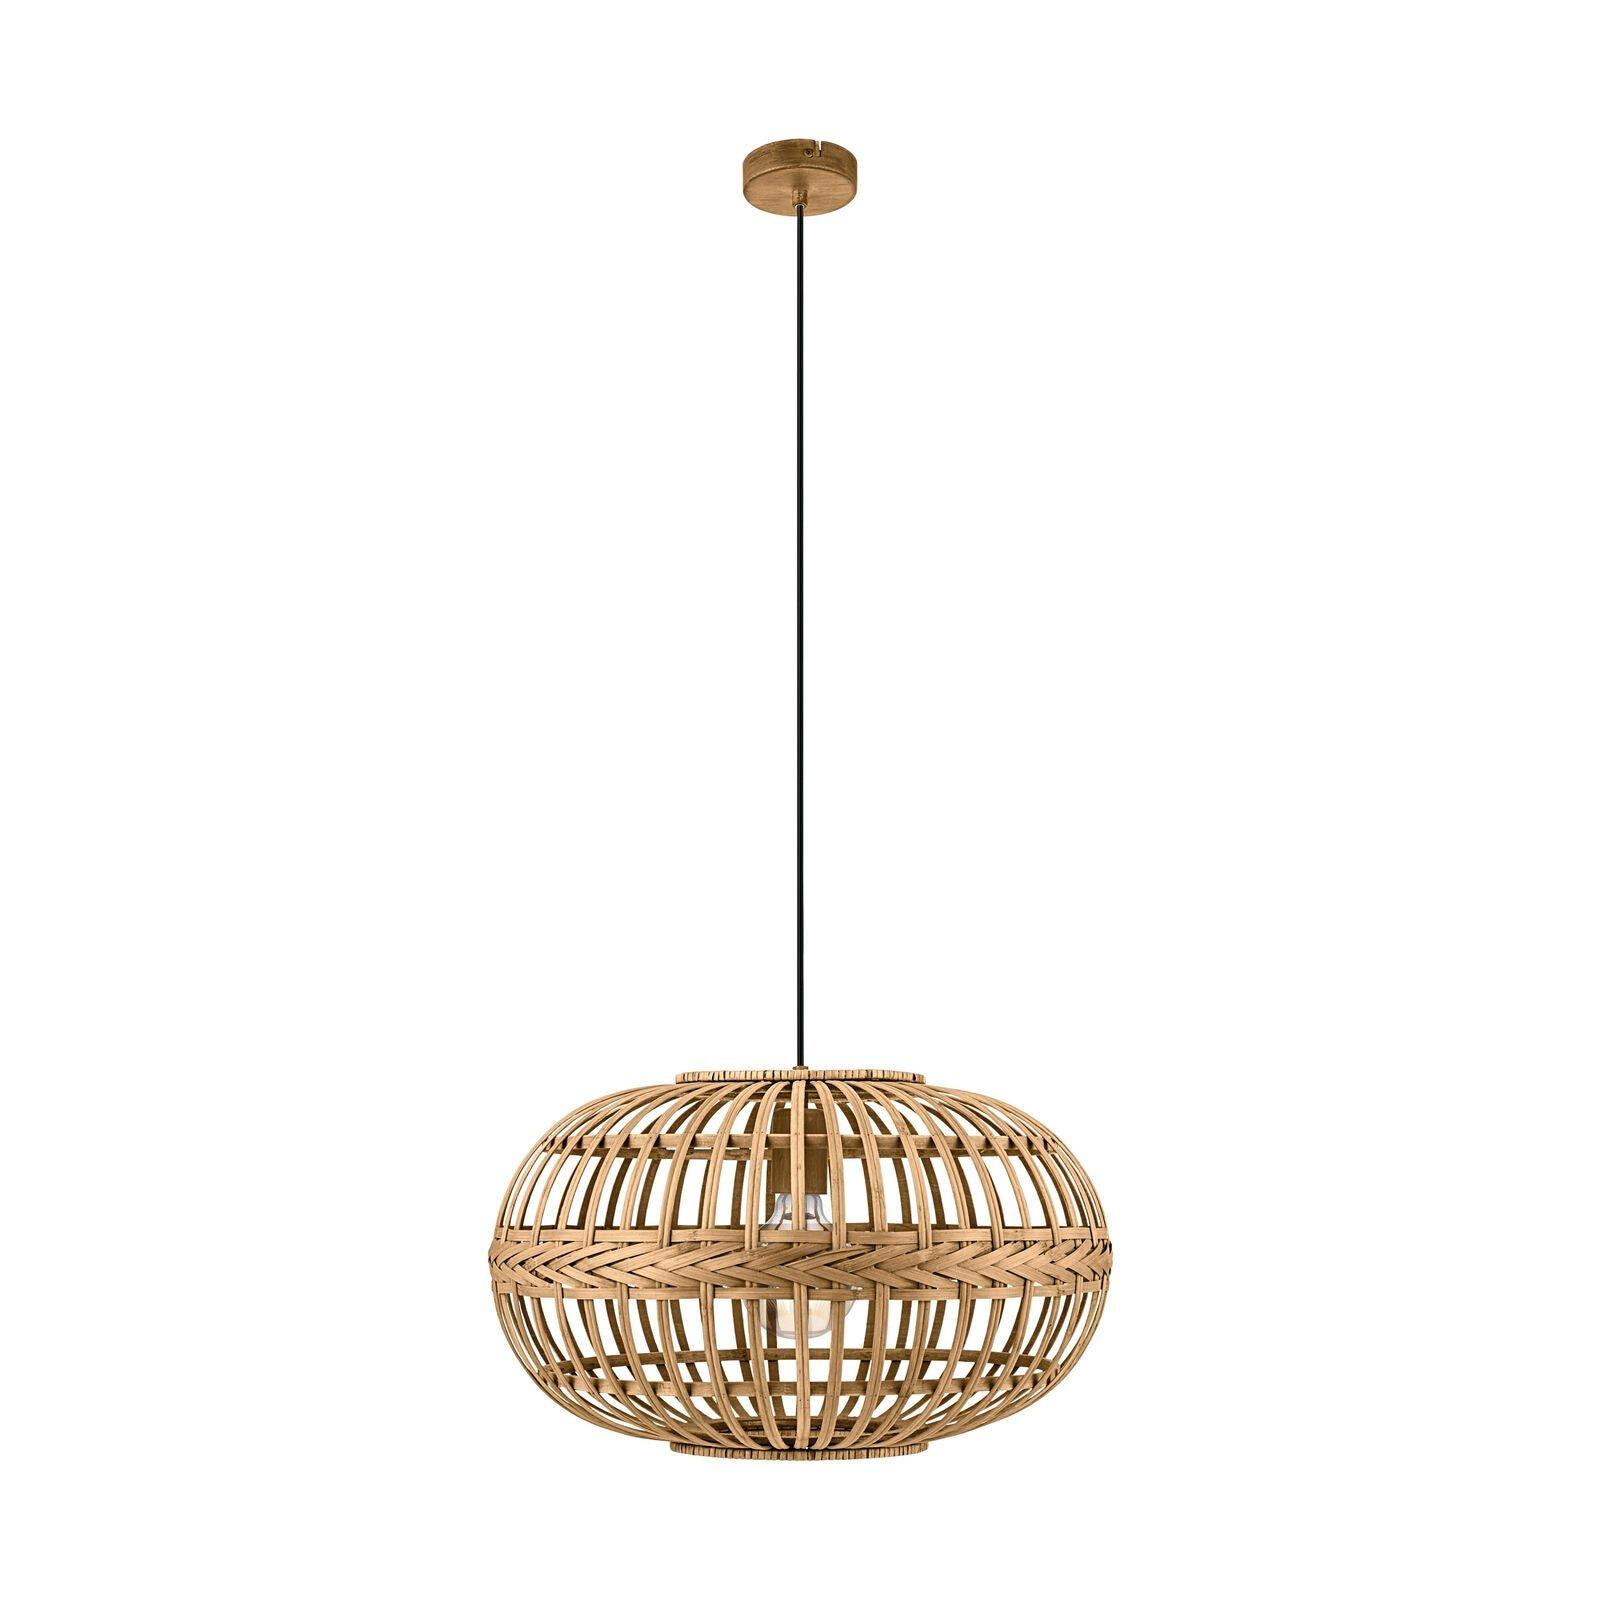 Hanging Ceiling Pendant Light Round Wicker Shade 1x 60W E27 Hallway Feature